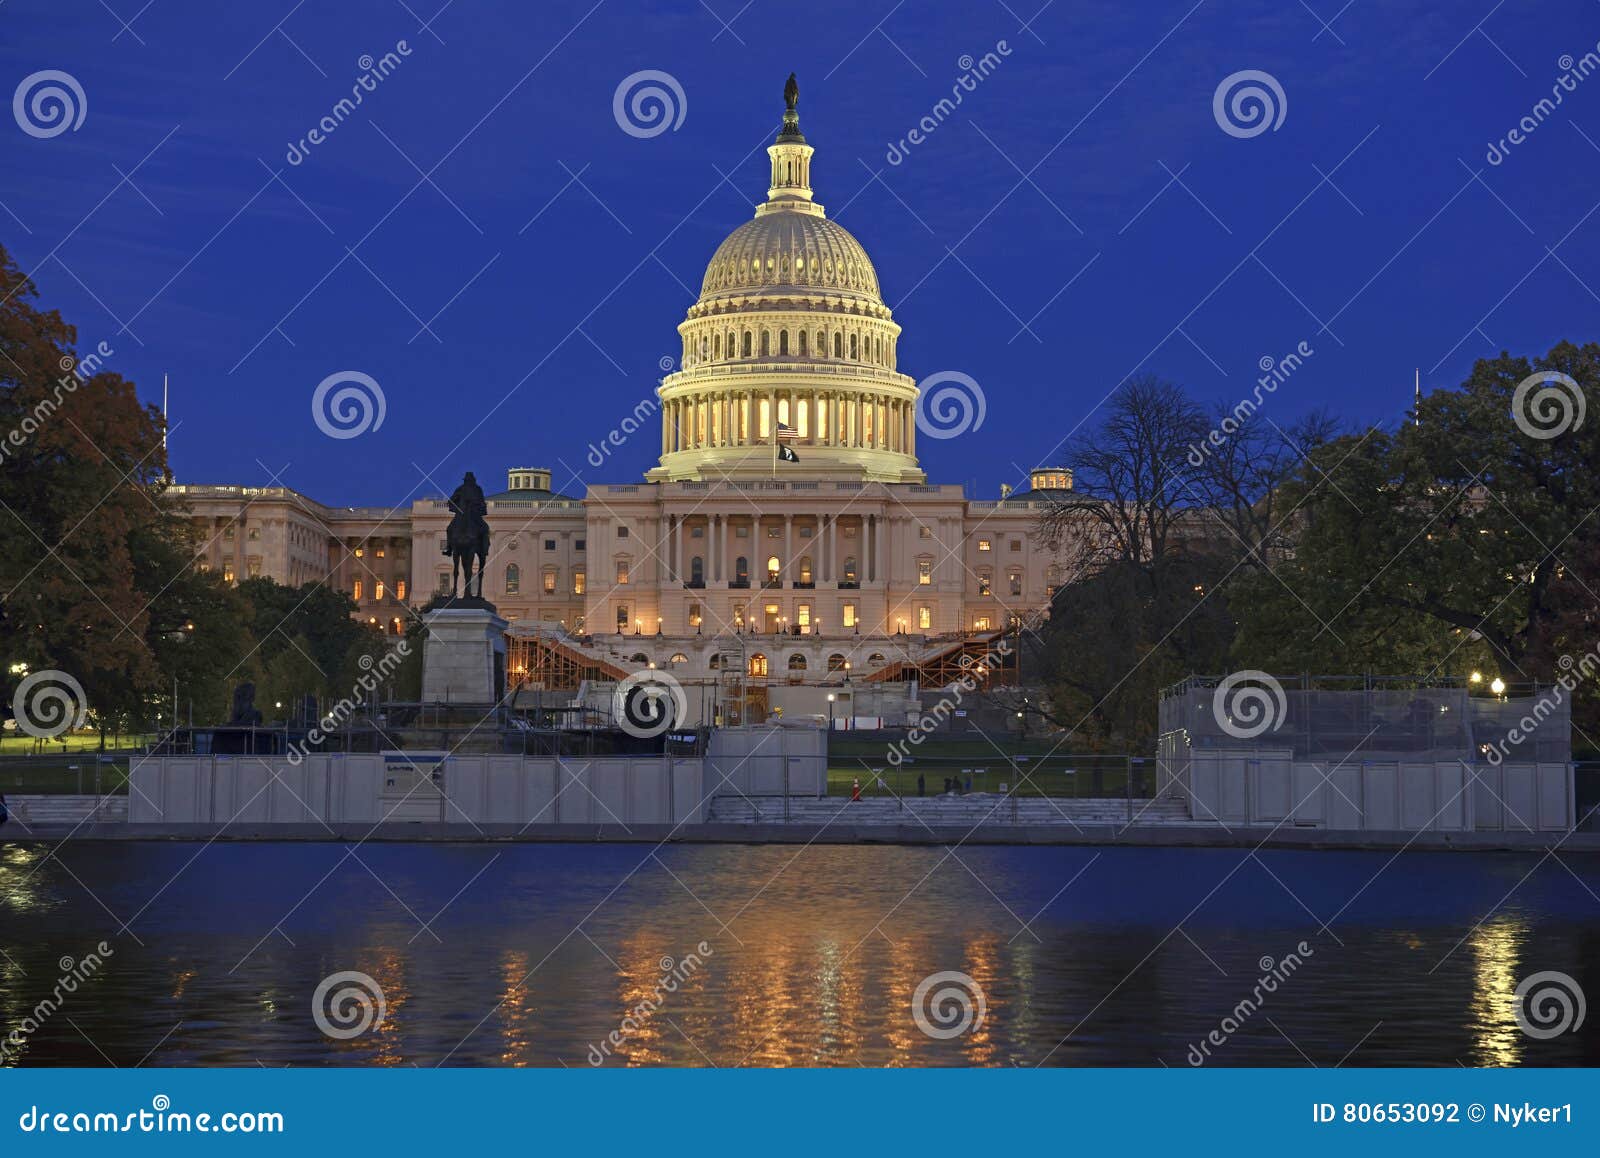 the capitol building in washington dc, capital of the united states of america